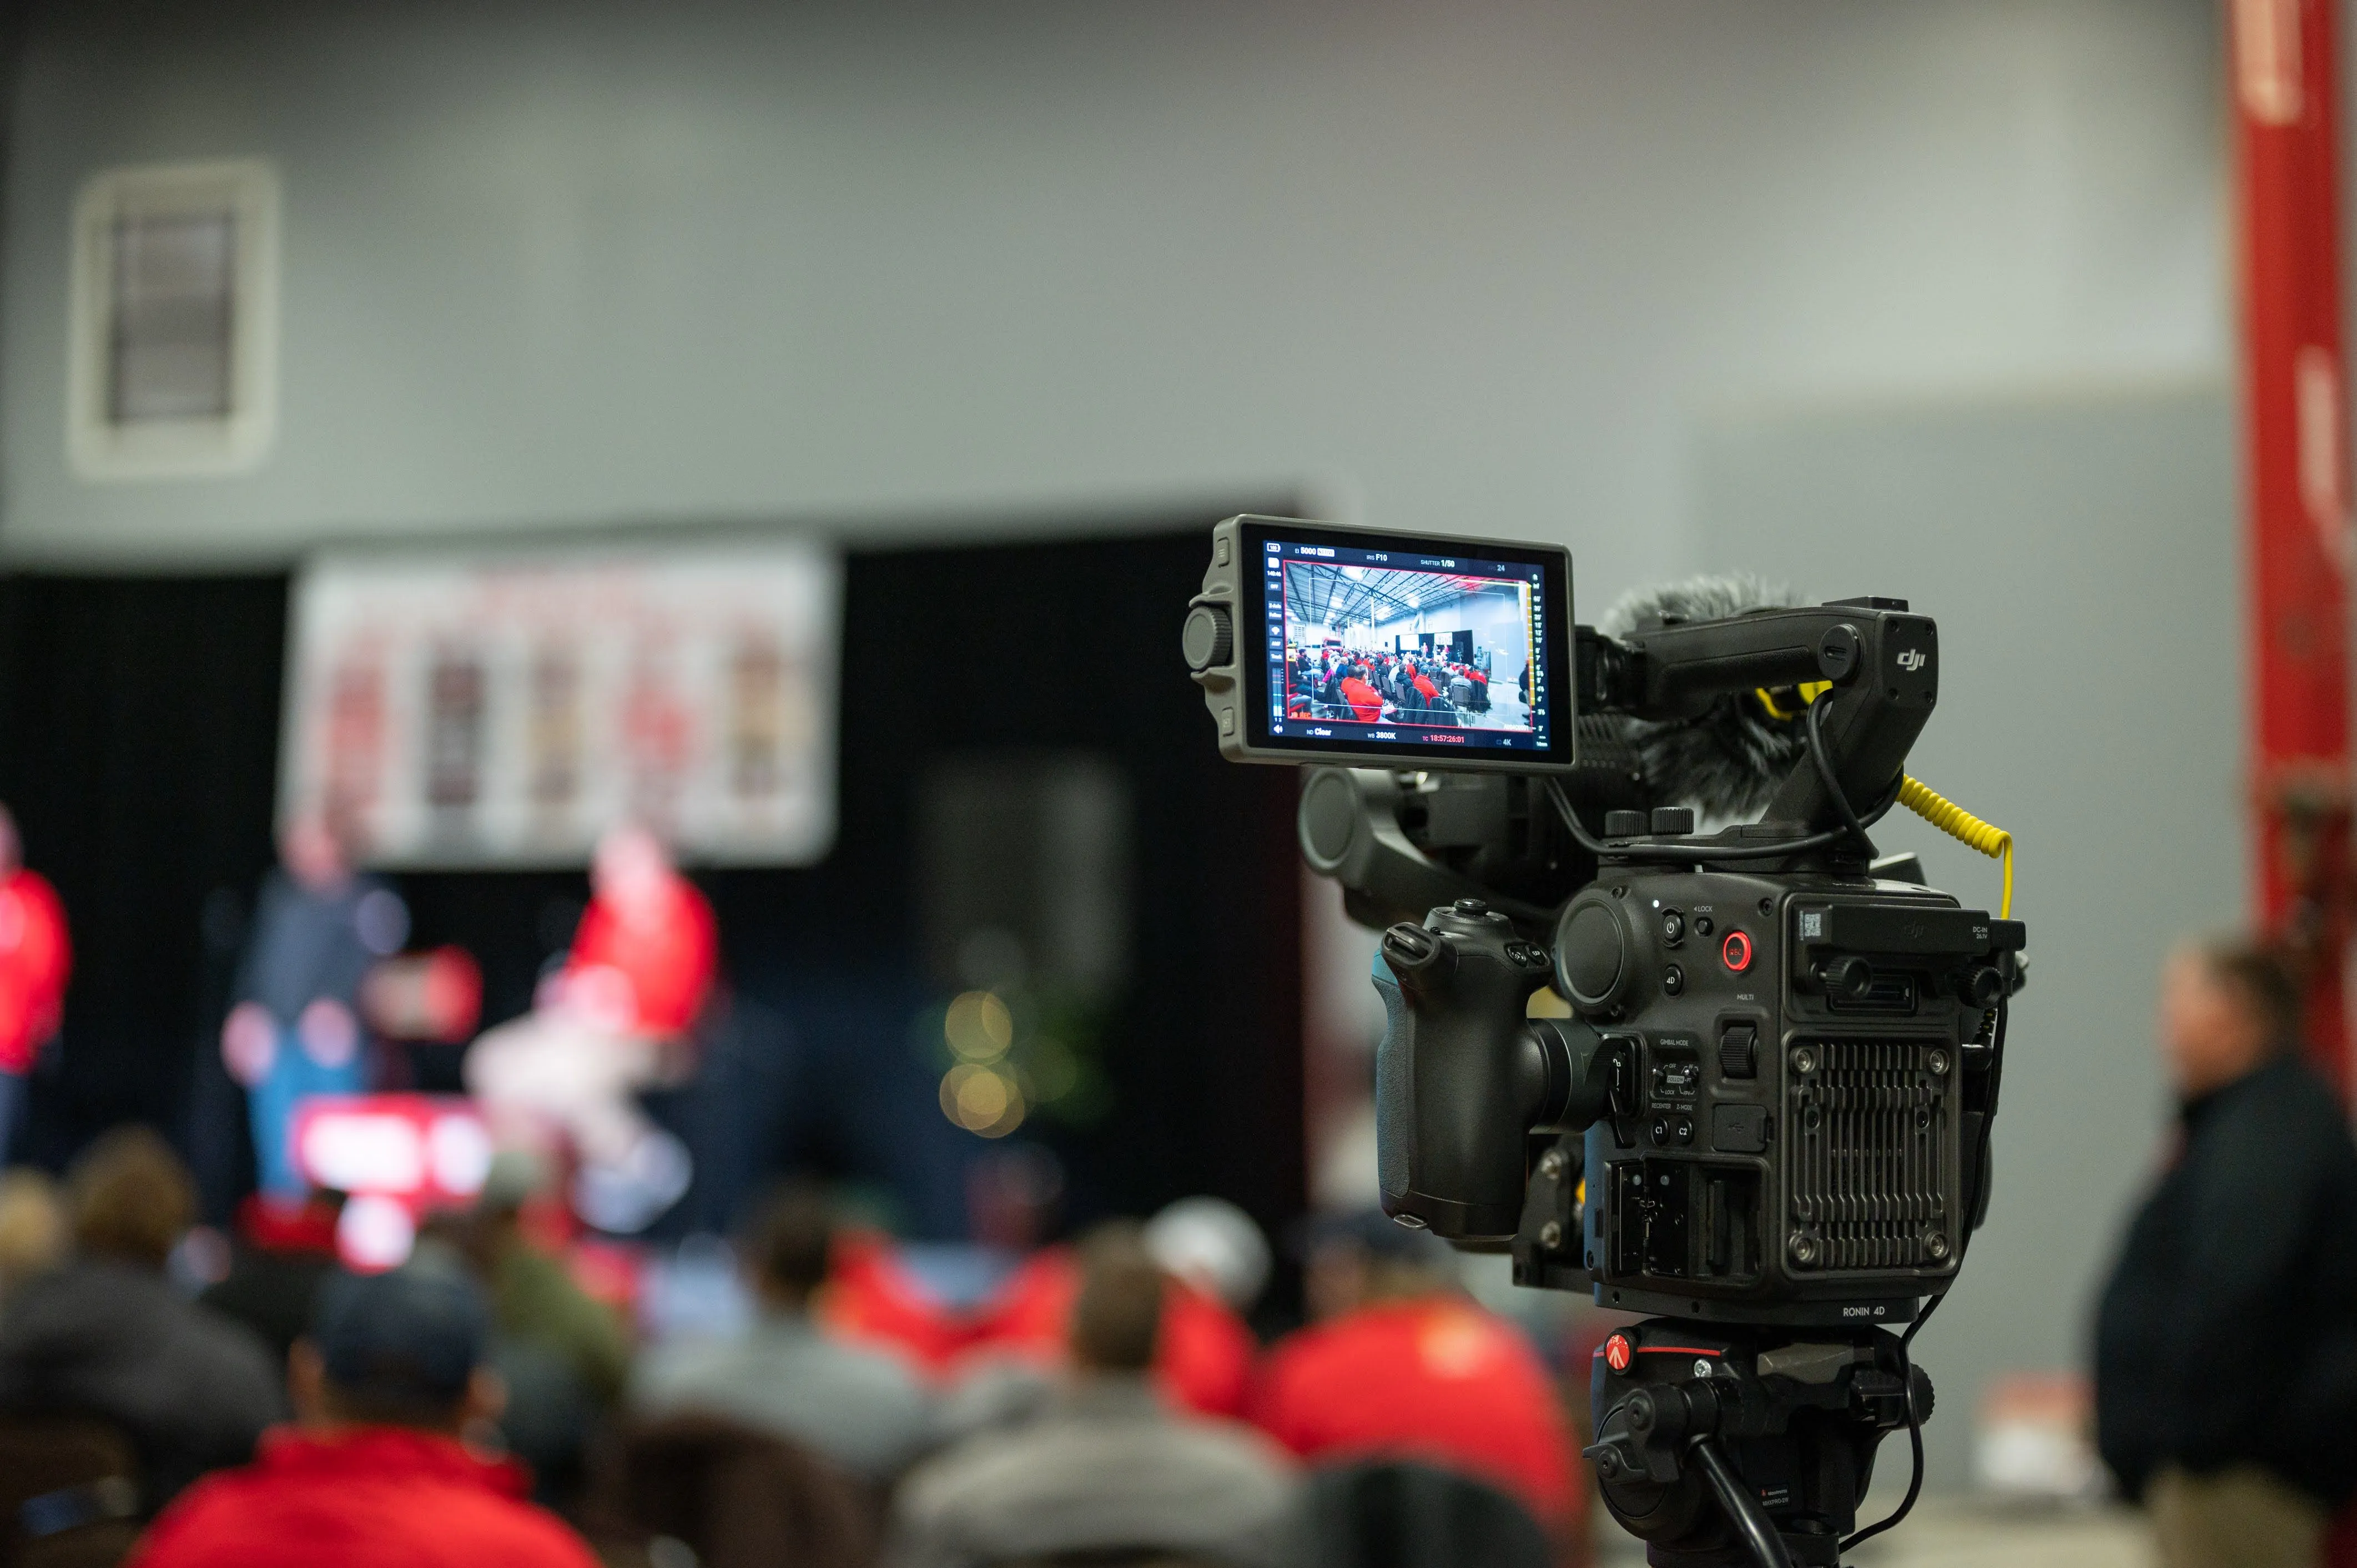 Professional video camera focused in the foreground with a blurred panel discussion being recorded in the background.